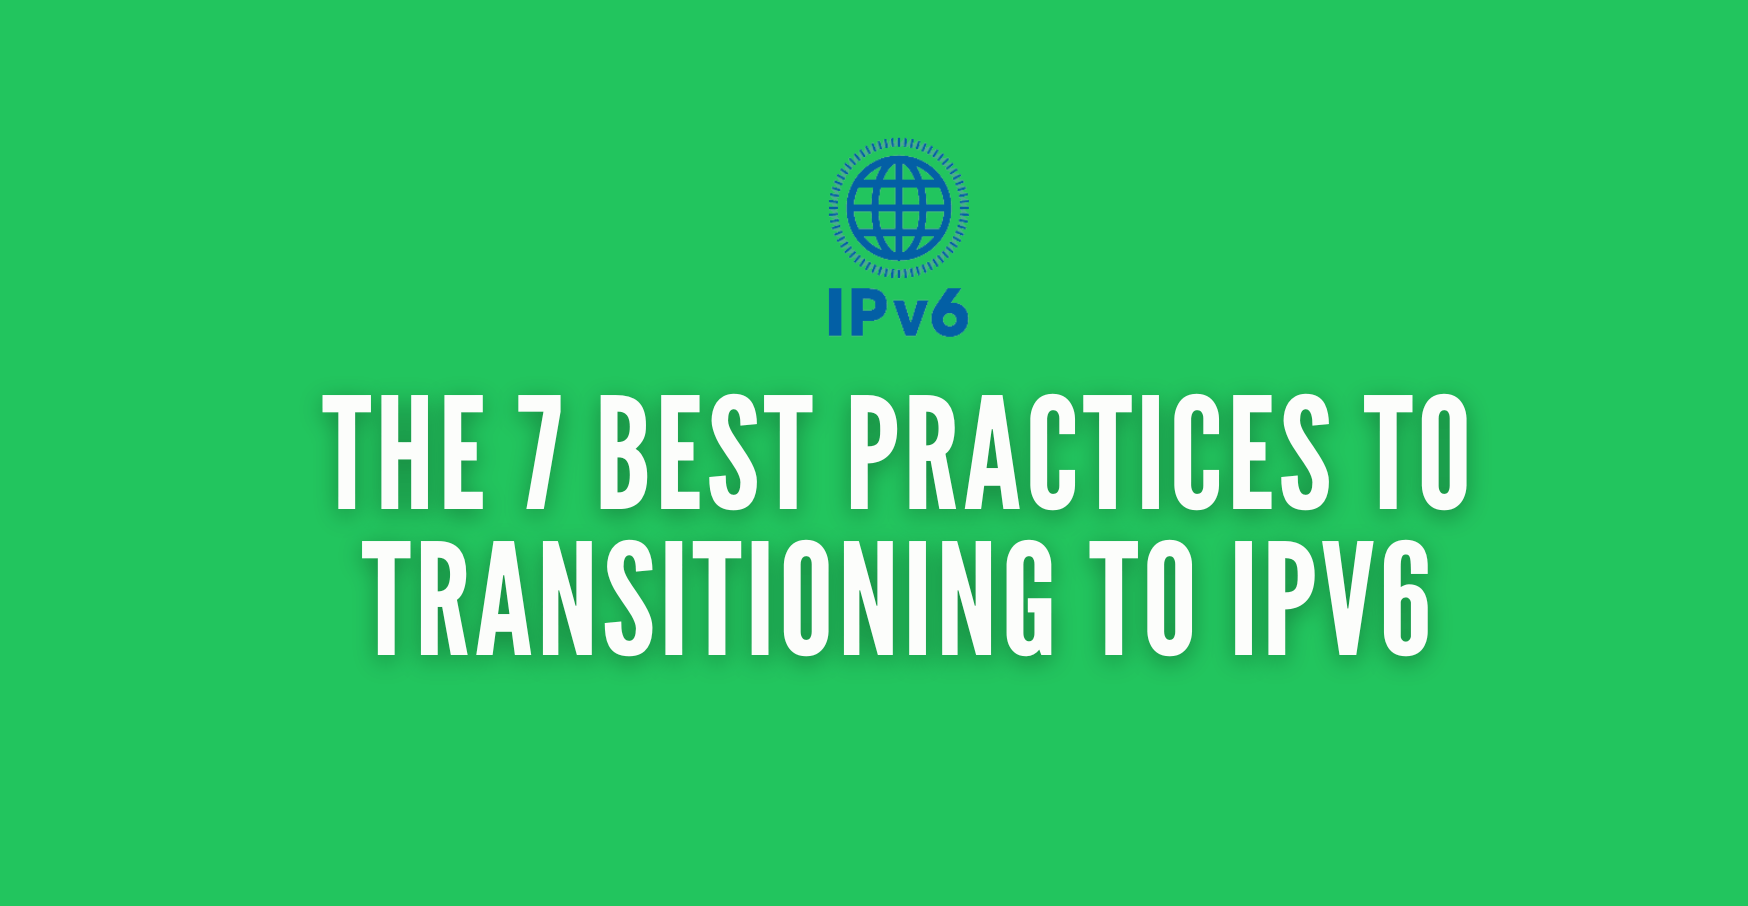 the 7 Best Practices to transitioning to IPv6